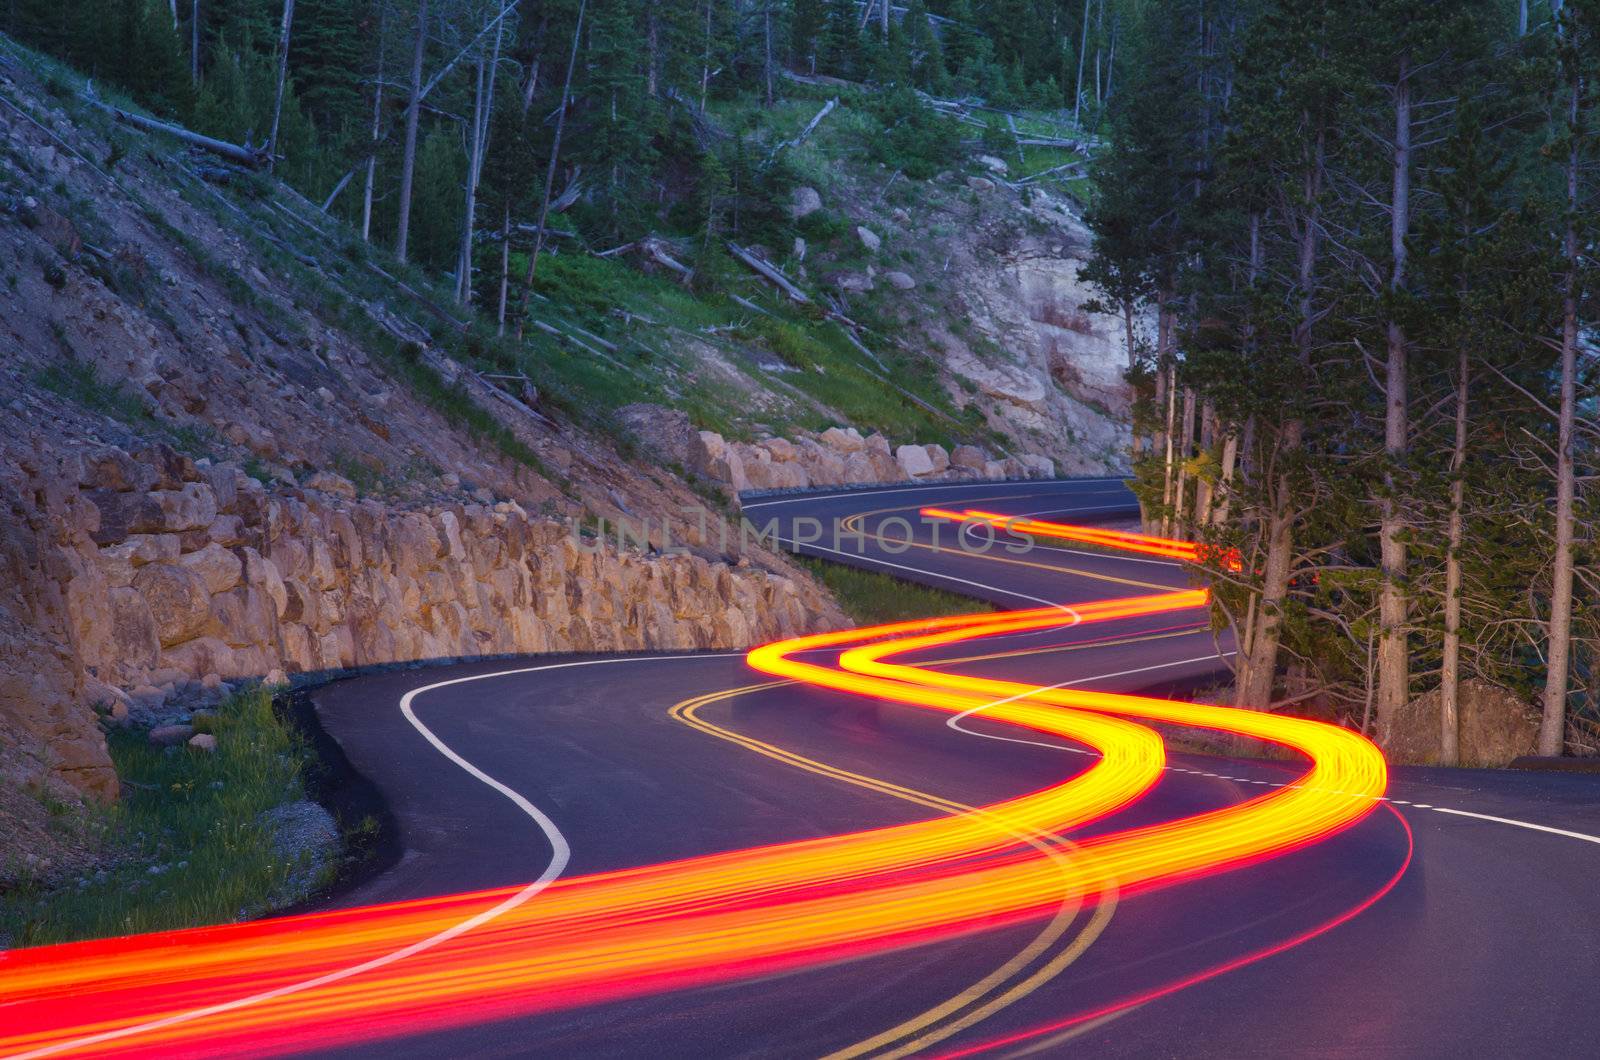 Twilight traffic on the Grand Loop Road in summer, Yellowstone National Park, Park County, Wyoming, USA